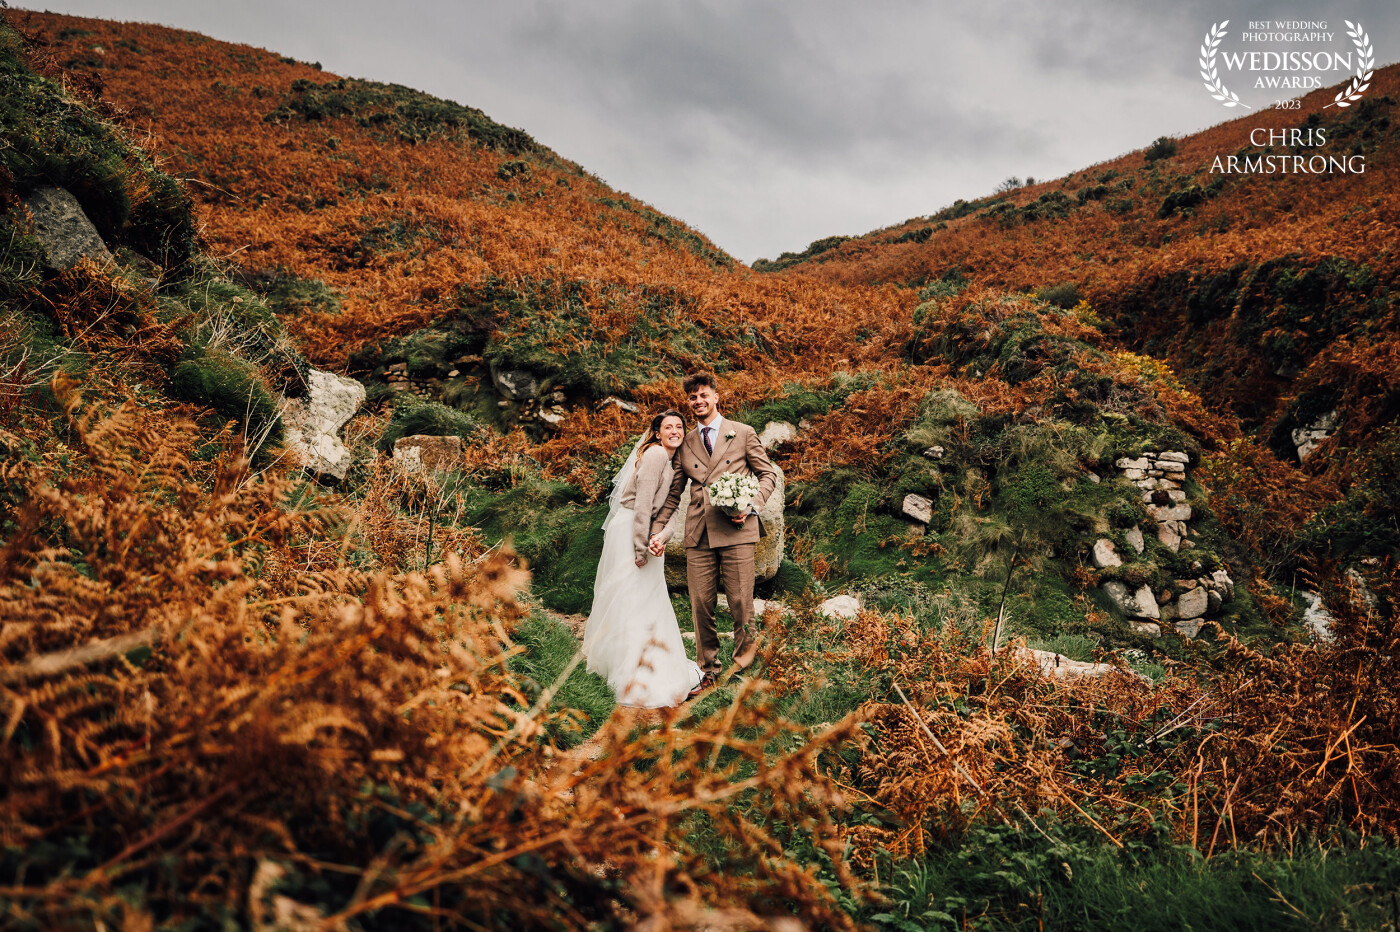 Lauren and Henry surrounded by the burnt orange heather on the cliffs, heading back to theire reception at Chypraze Wedding Barn.